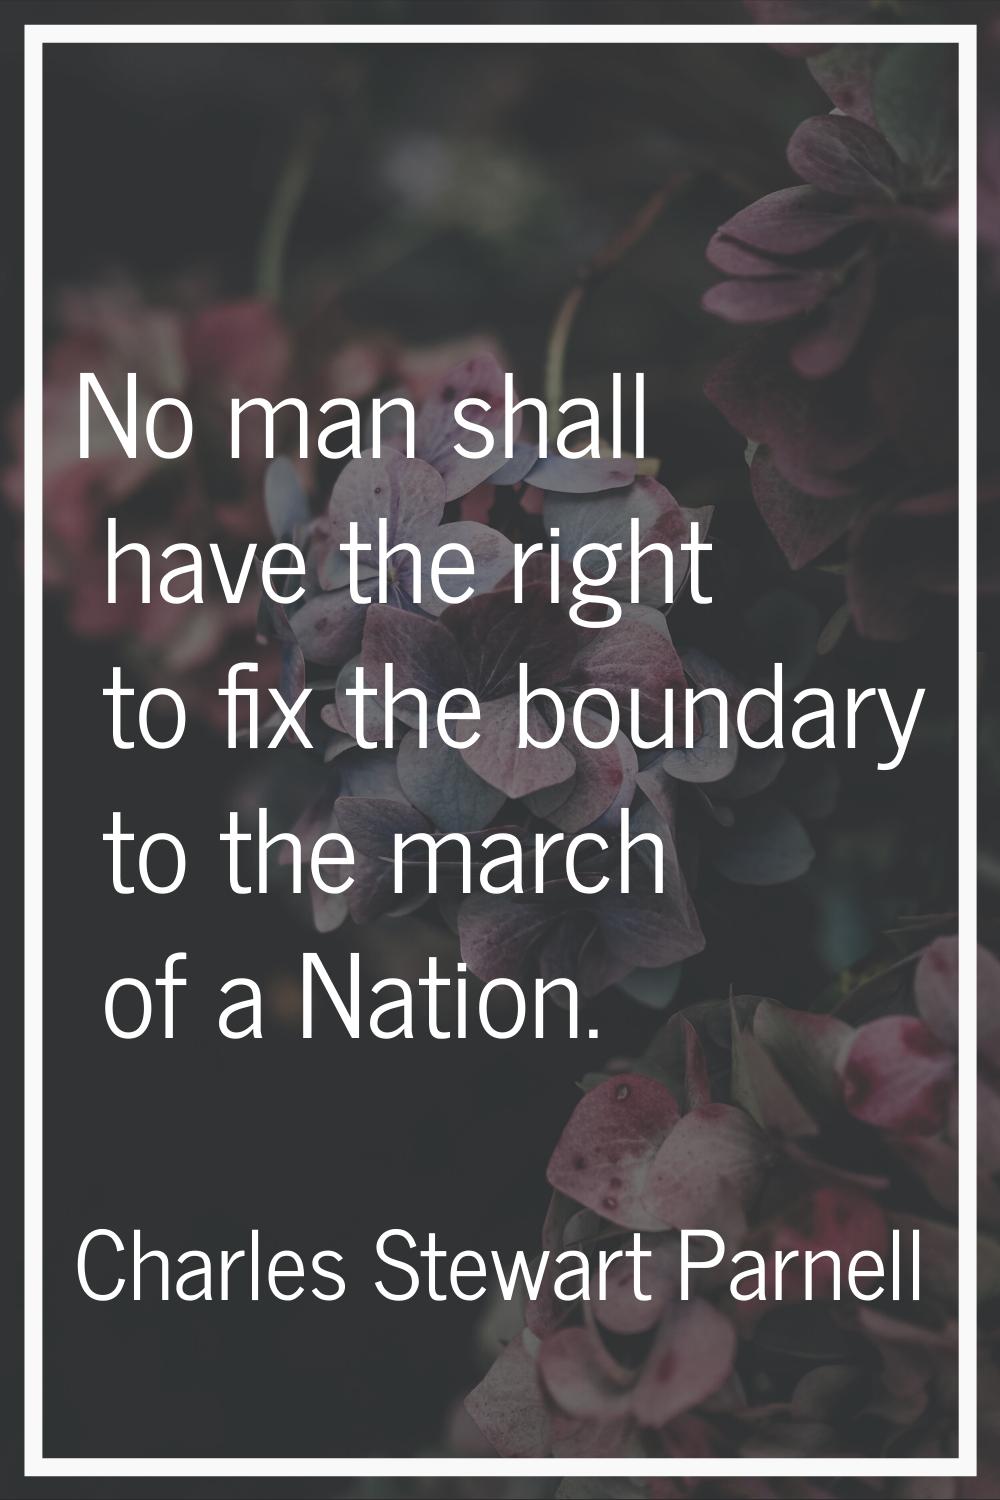 No man shall have the right to fix the boundary to the march of a Nation.